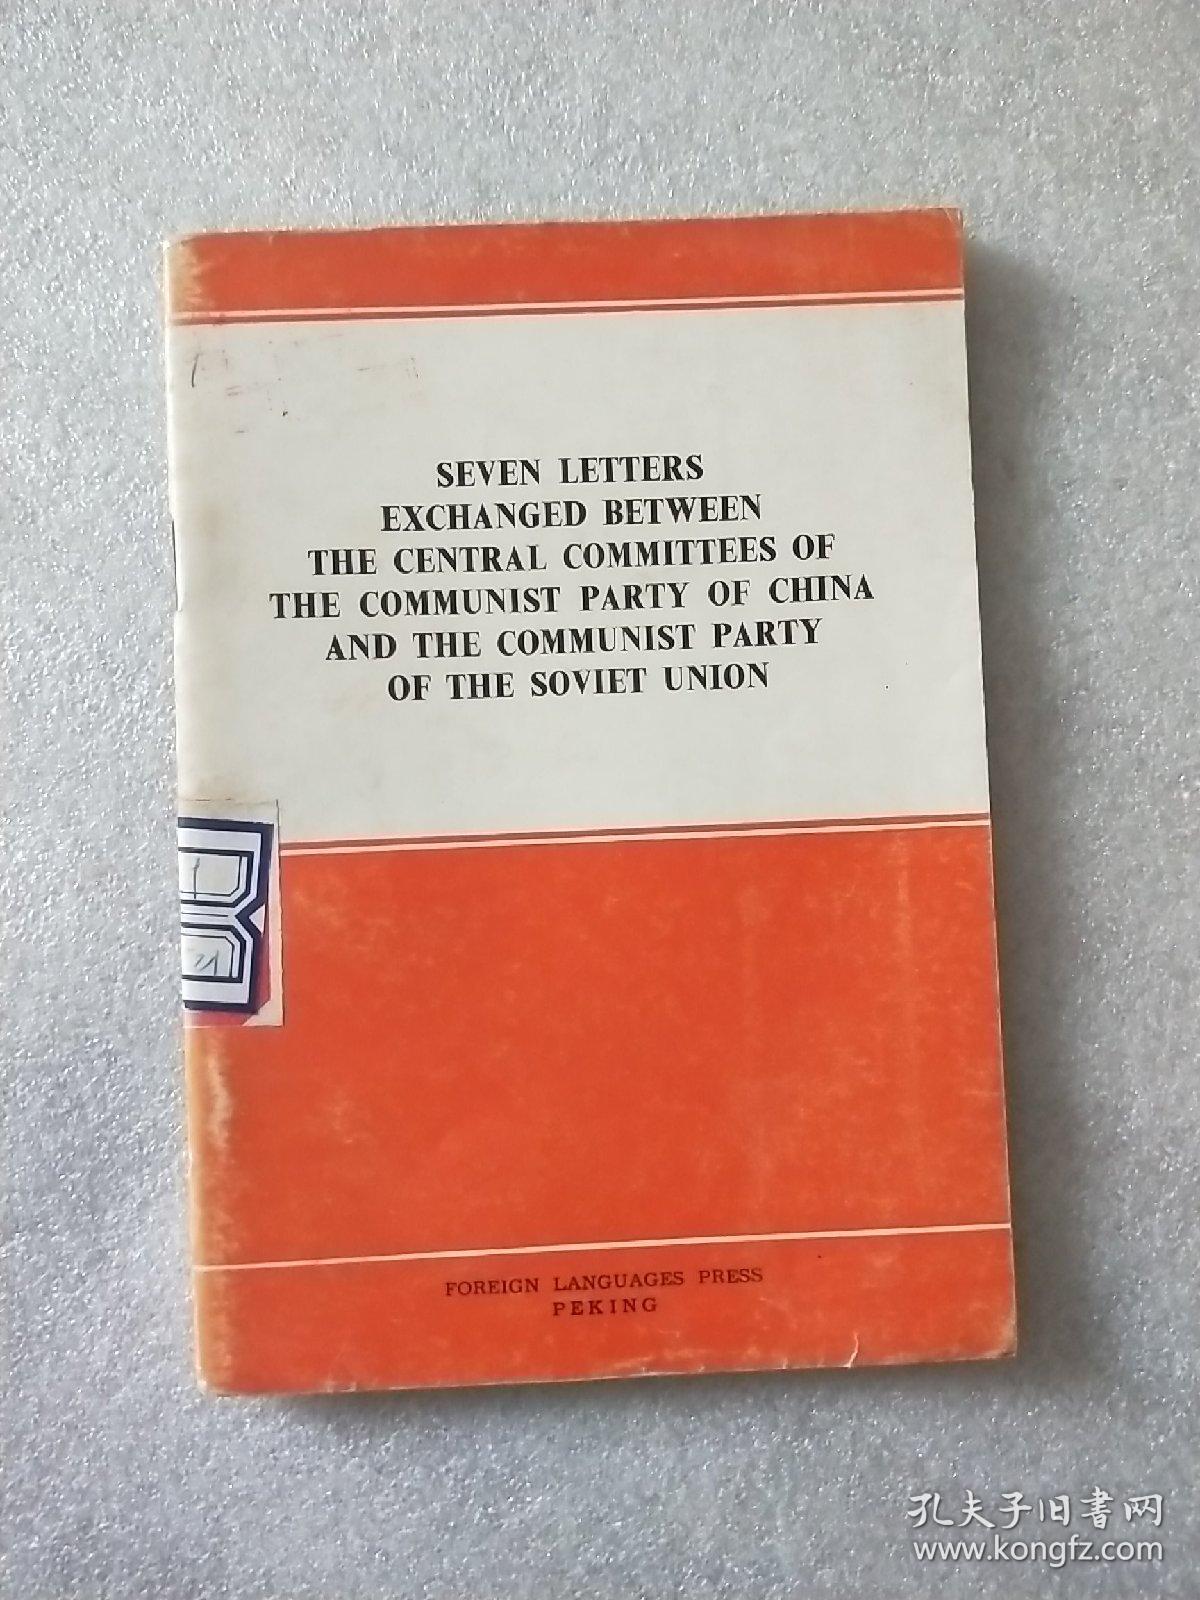 SEVEN LETTERS EXCHANGED BETWEEN THE CENTRAL COMMITTEES OF THE COMMUNIST PARTY OF CHINA AND THE COMMUNIST PARTY OF THE SOVIET UNION